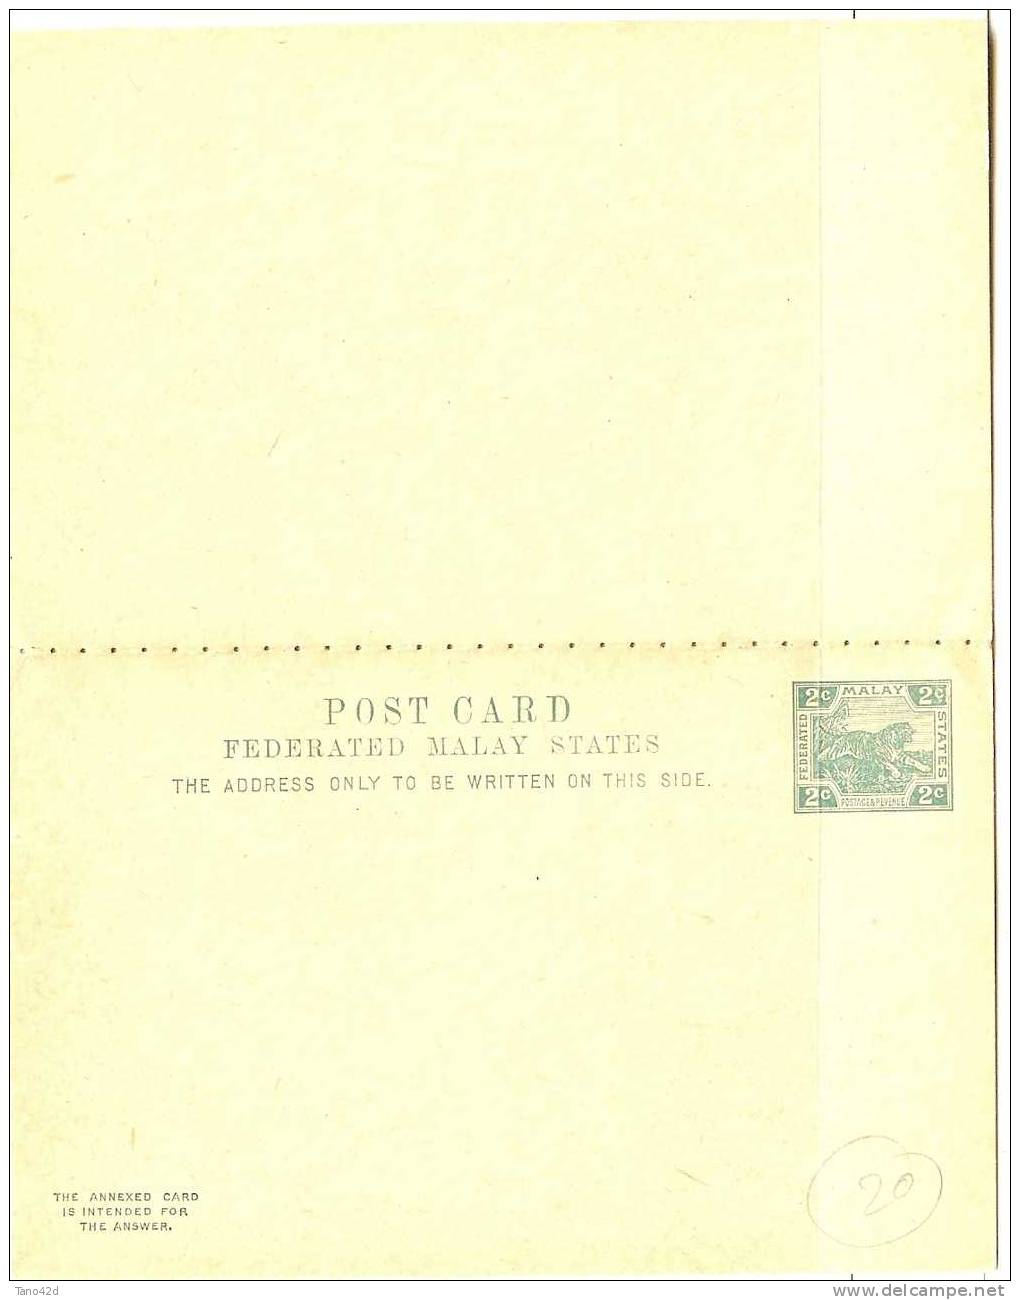 REF LCHA4 - MALAY - 2 CARTES POSTALES AVEC REPONSE PAYEE THEME TIGRE COULEUR VERT ET BRUN - Malaya (British Military Administration)